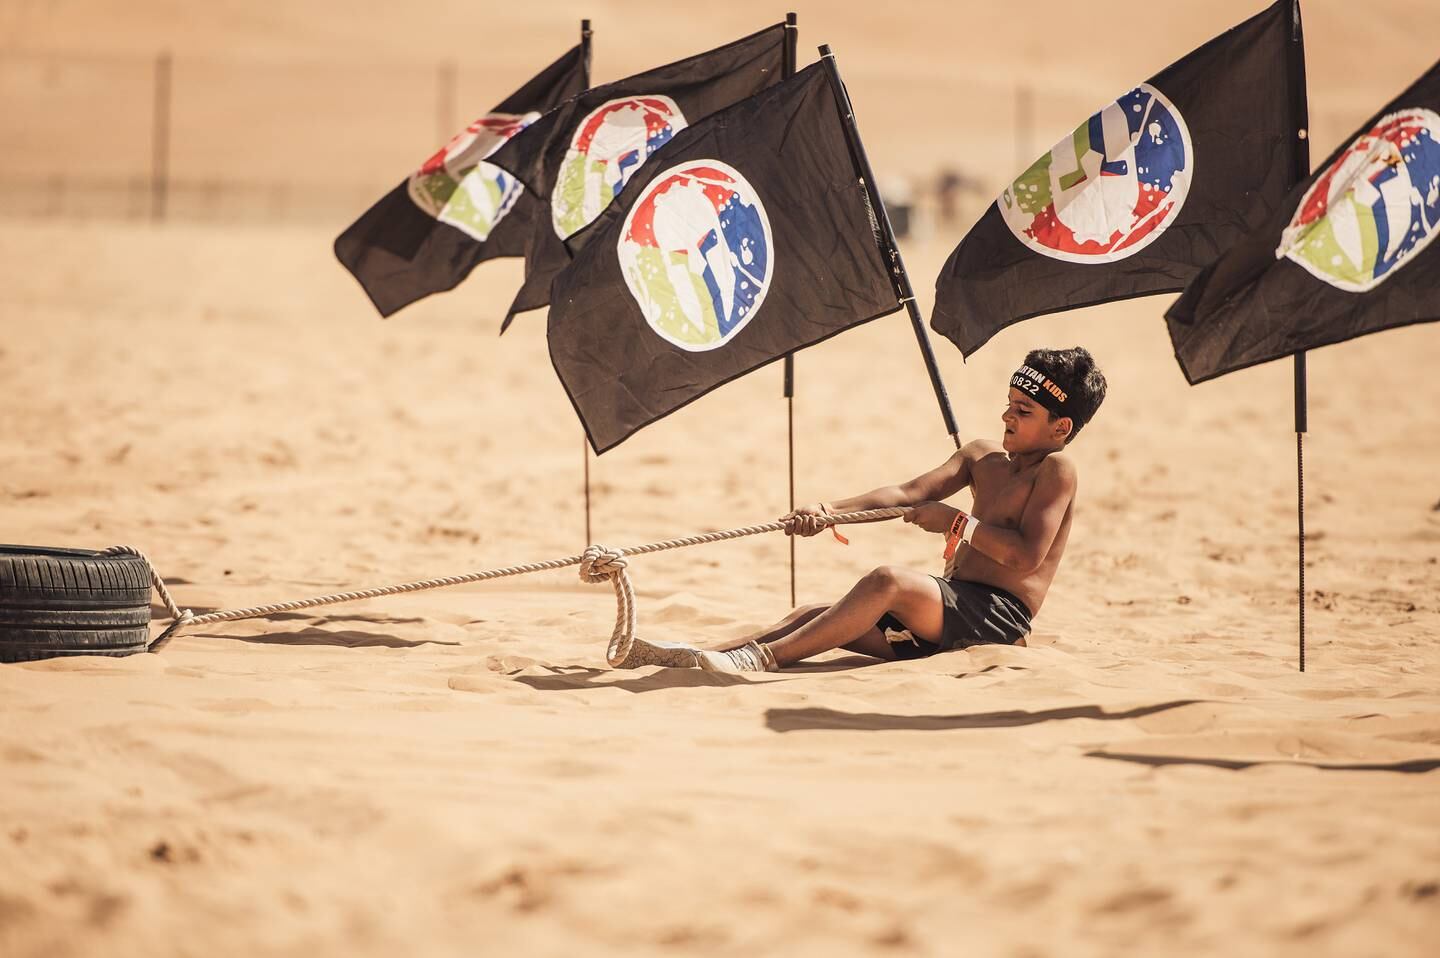 Families and Spartans of all ages have the chance to compete in various tournaments at the Spartan World Championship. Photo: Spartan